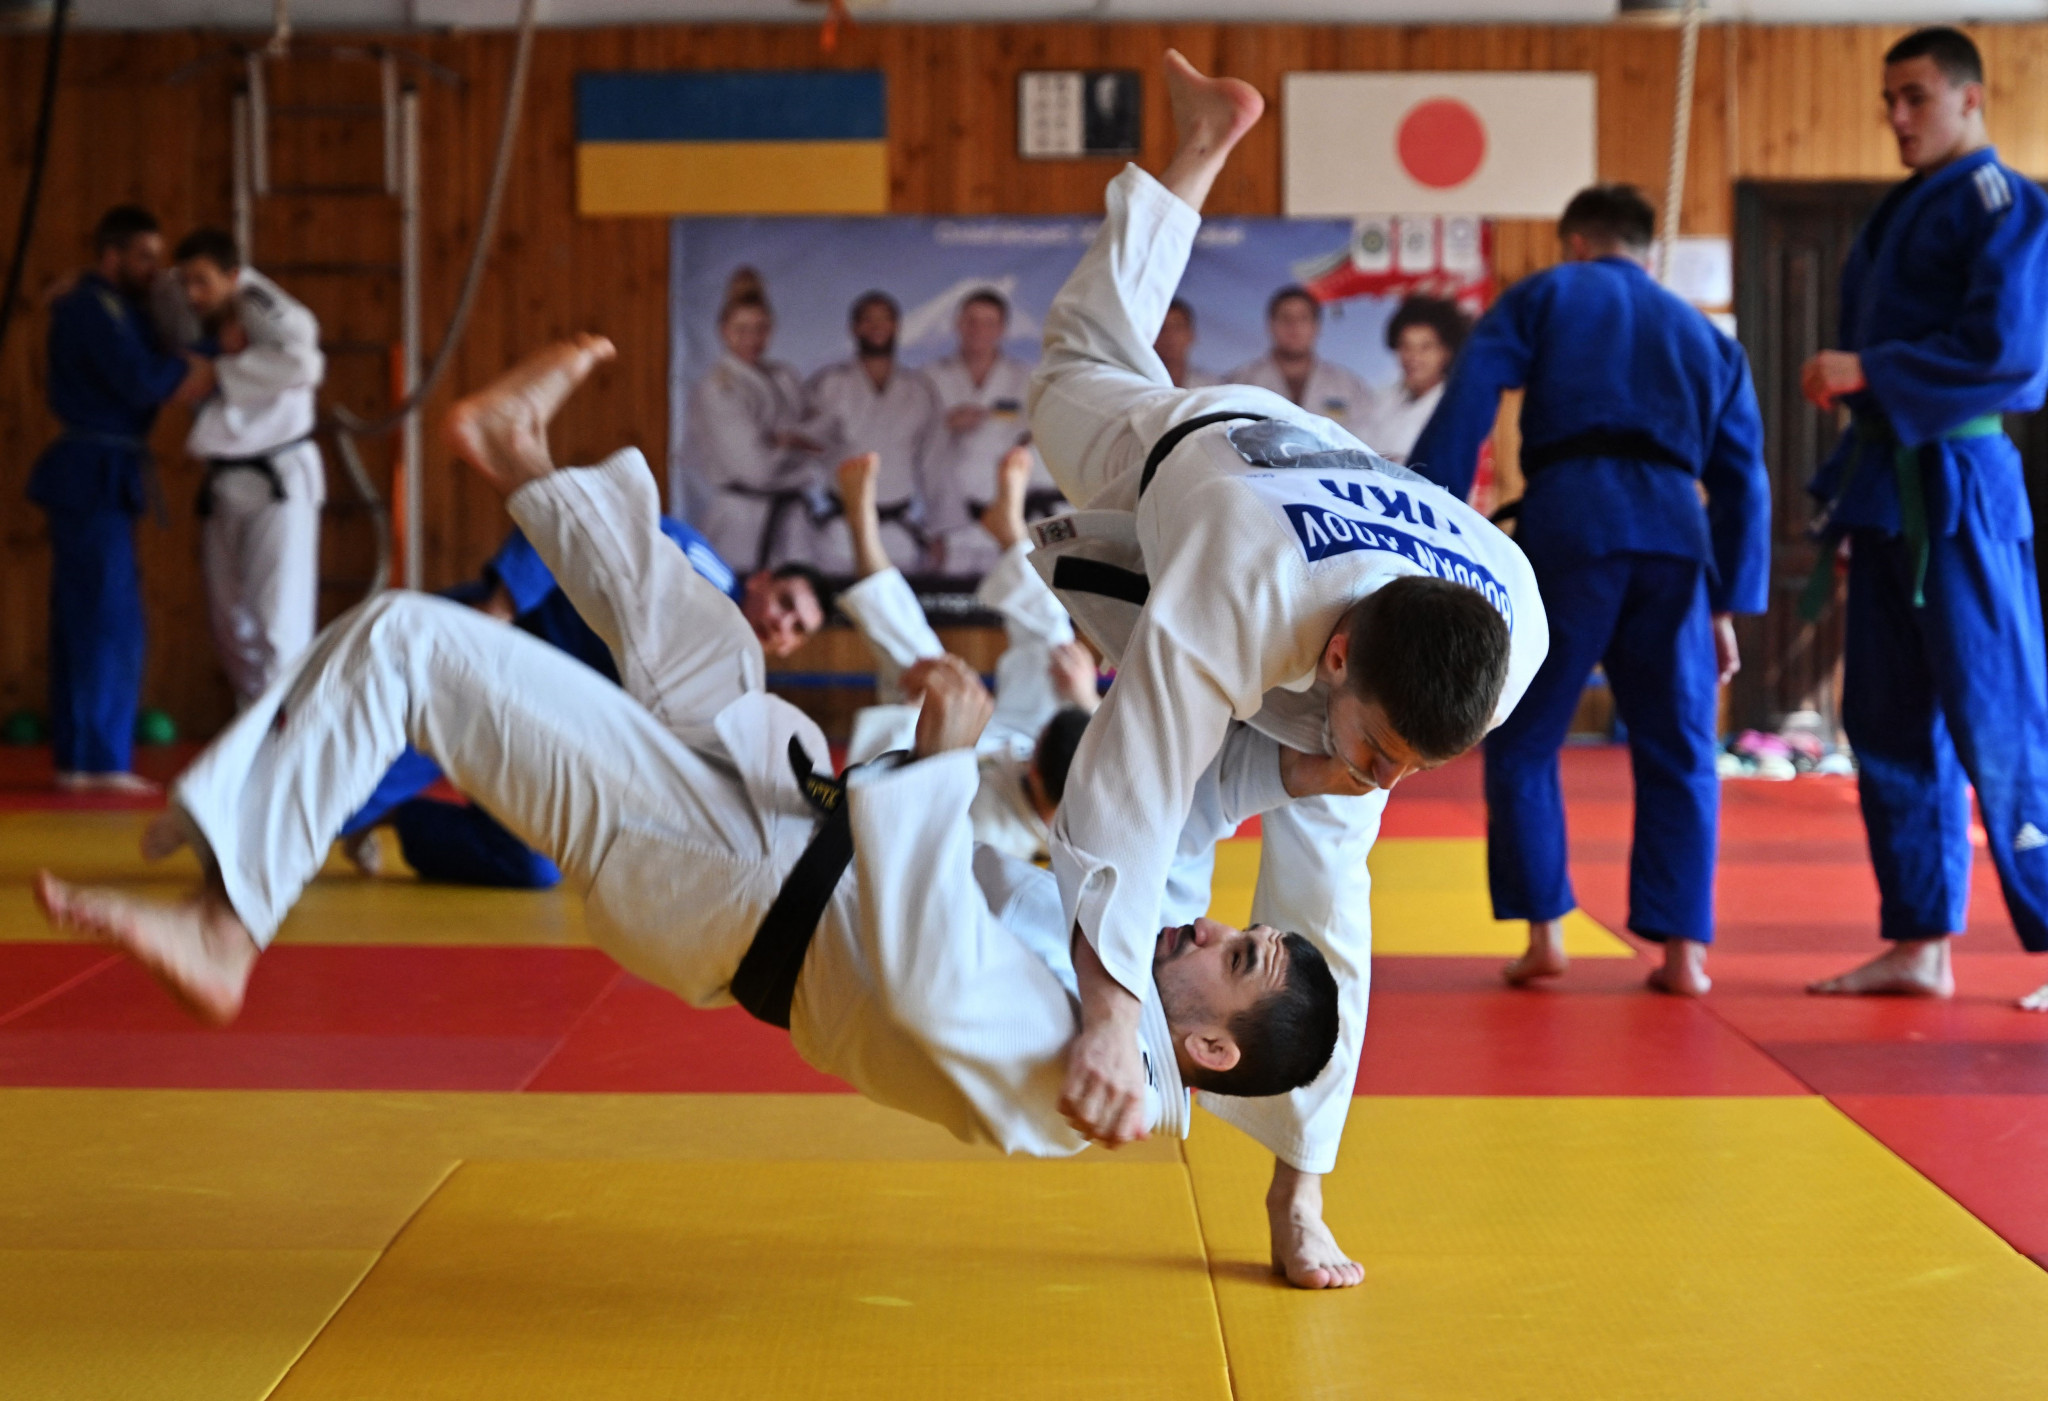 Ukrainian judoka have been training in Kyiv after boycotting the World Judo Championships over the presence of Russian and Belarusian athletes ©Getty Images